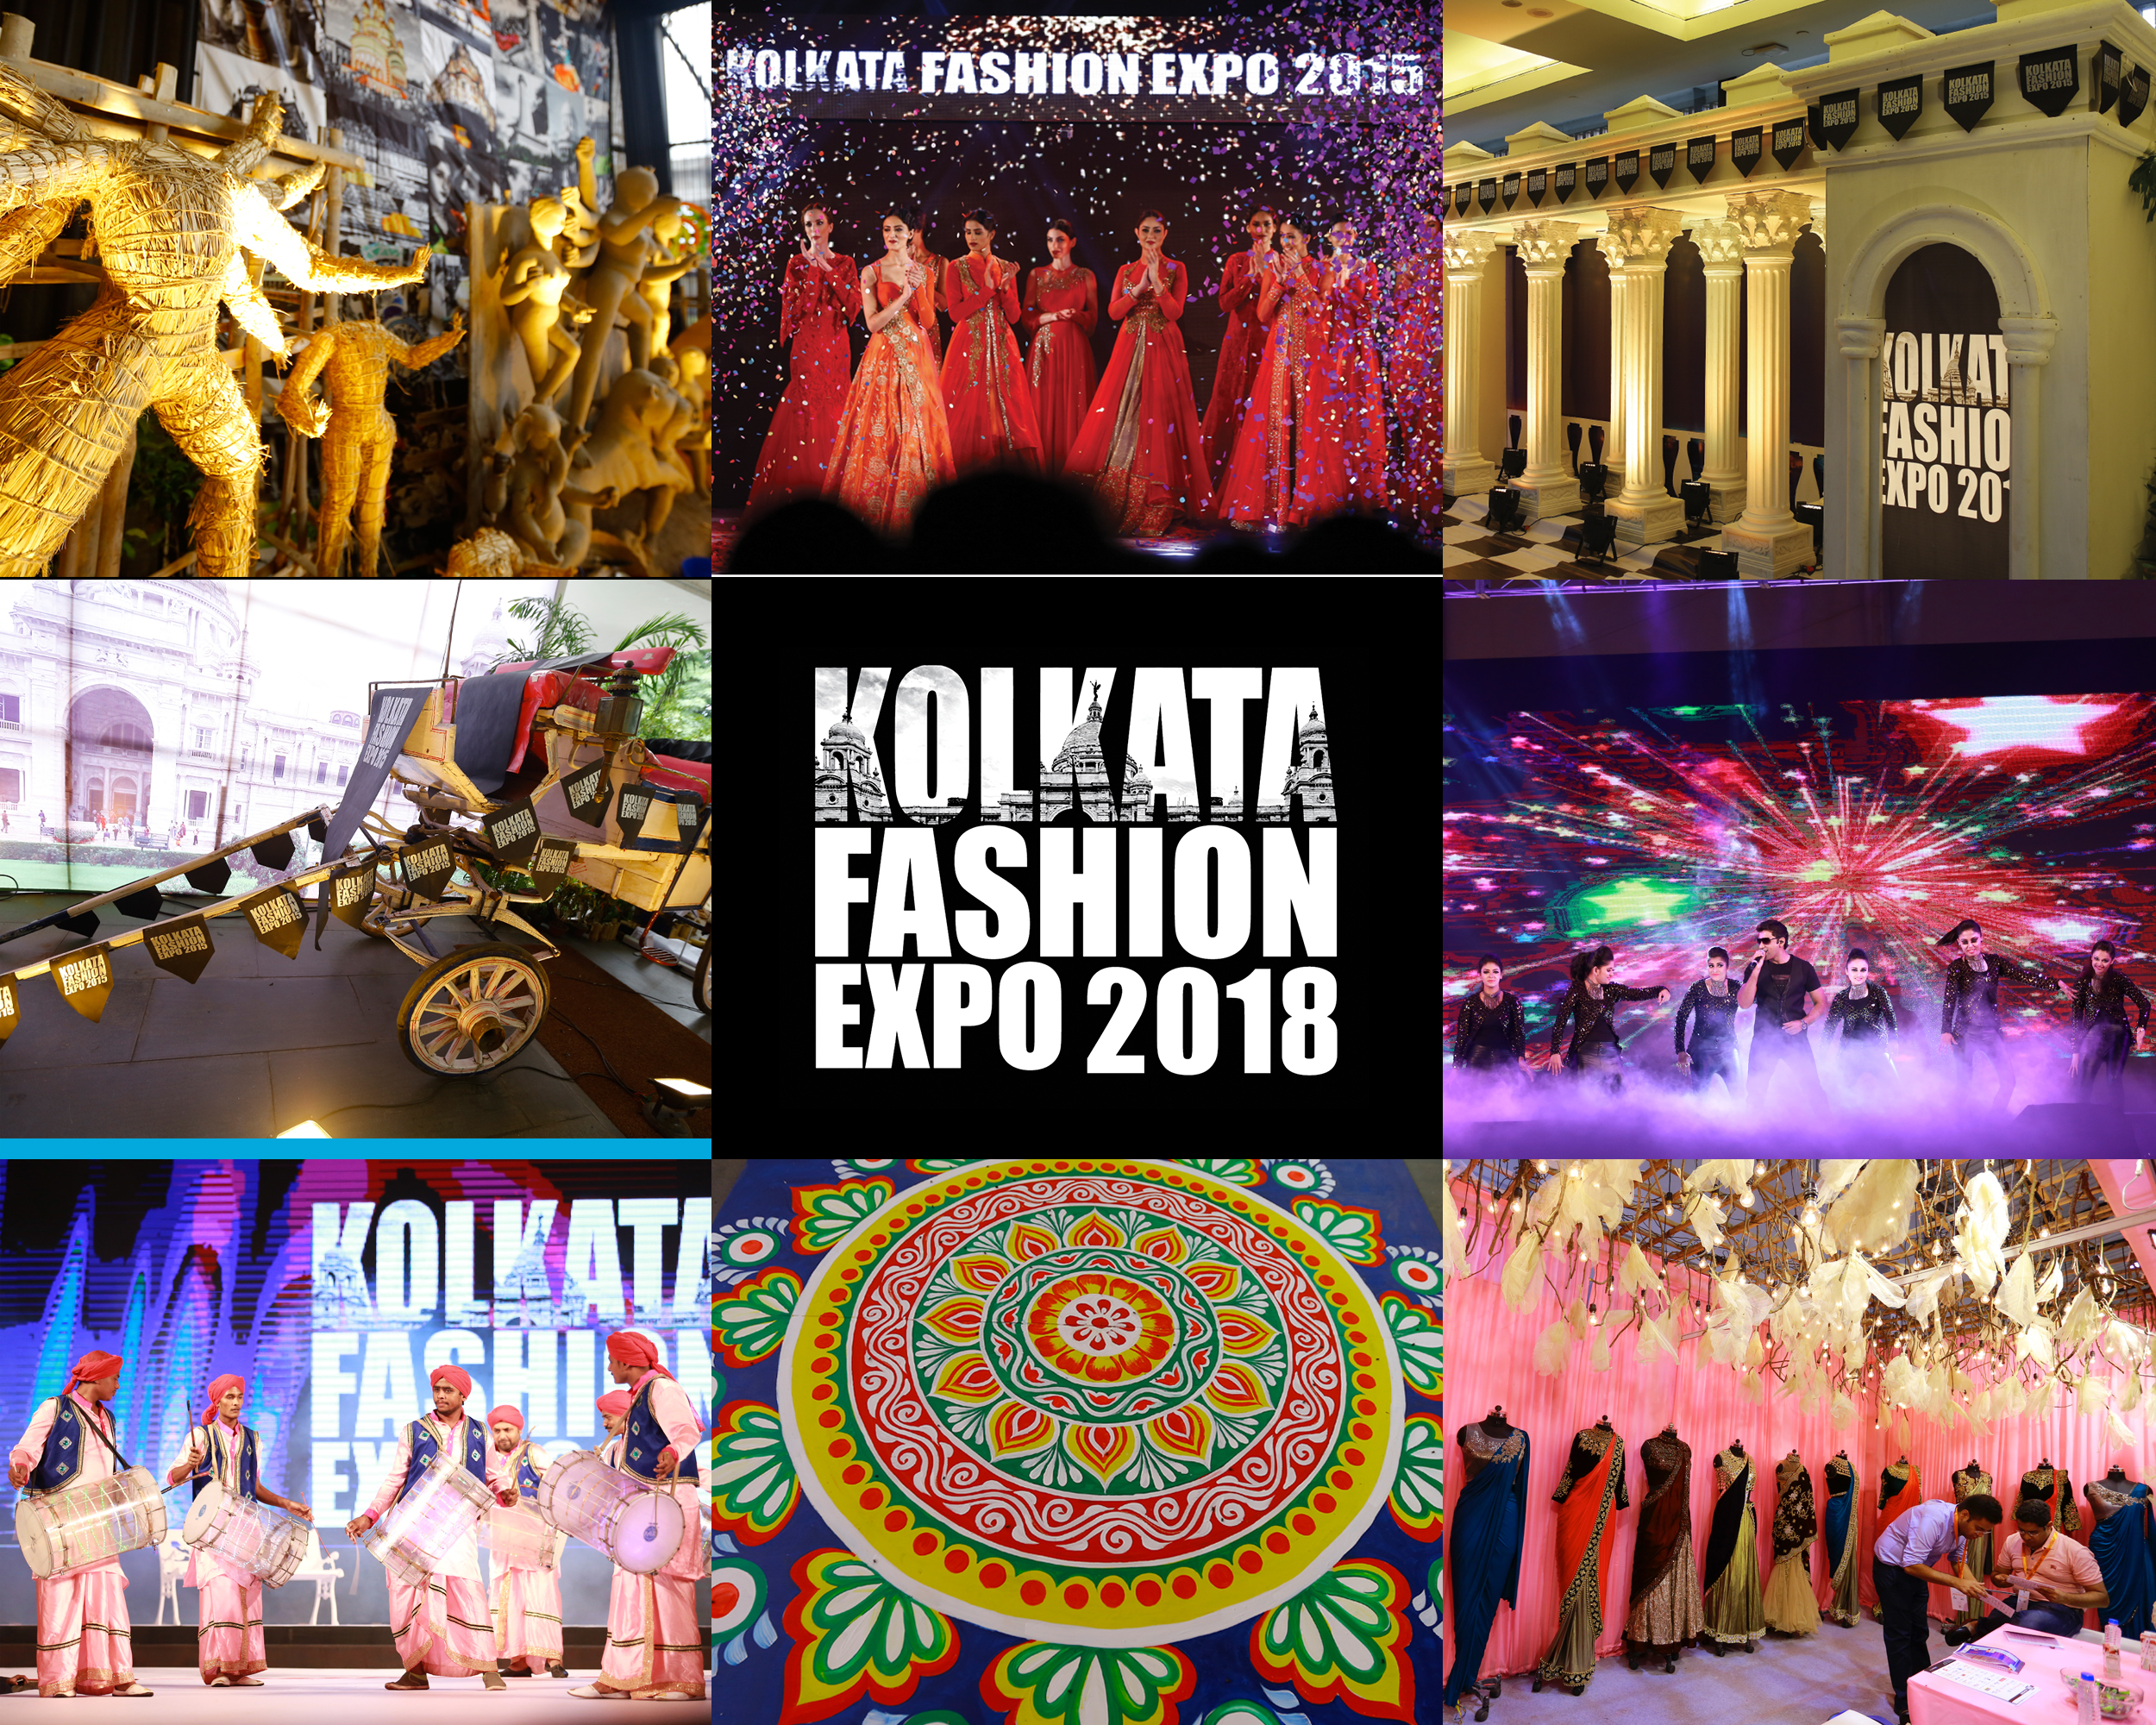 Kolkata Fashion Expo and Its Warm Stories on How It Is Associated with Cultures